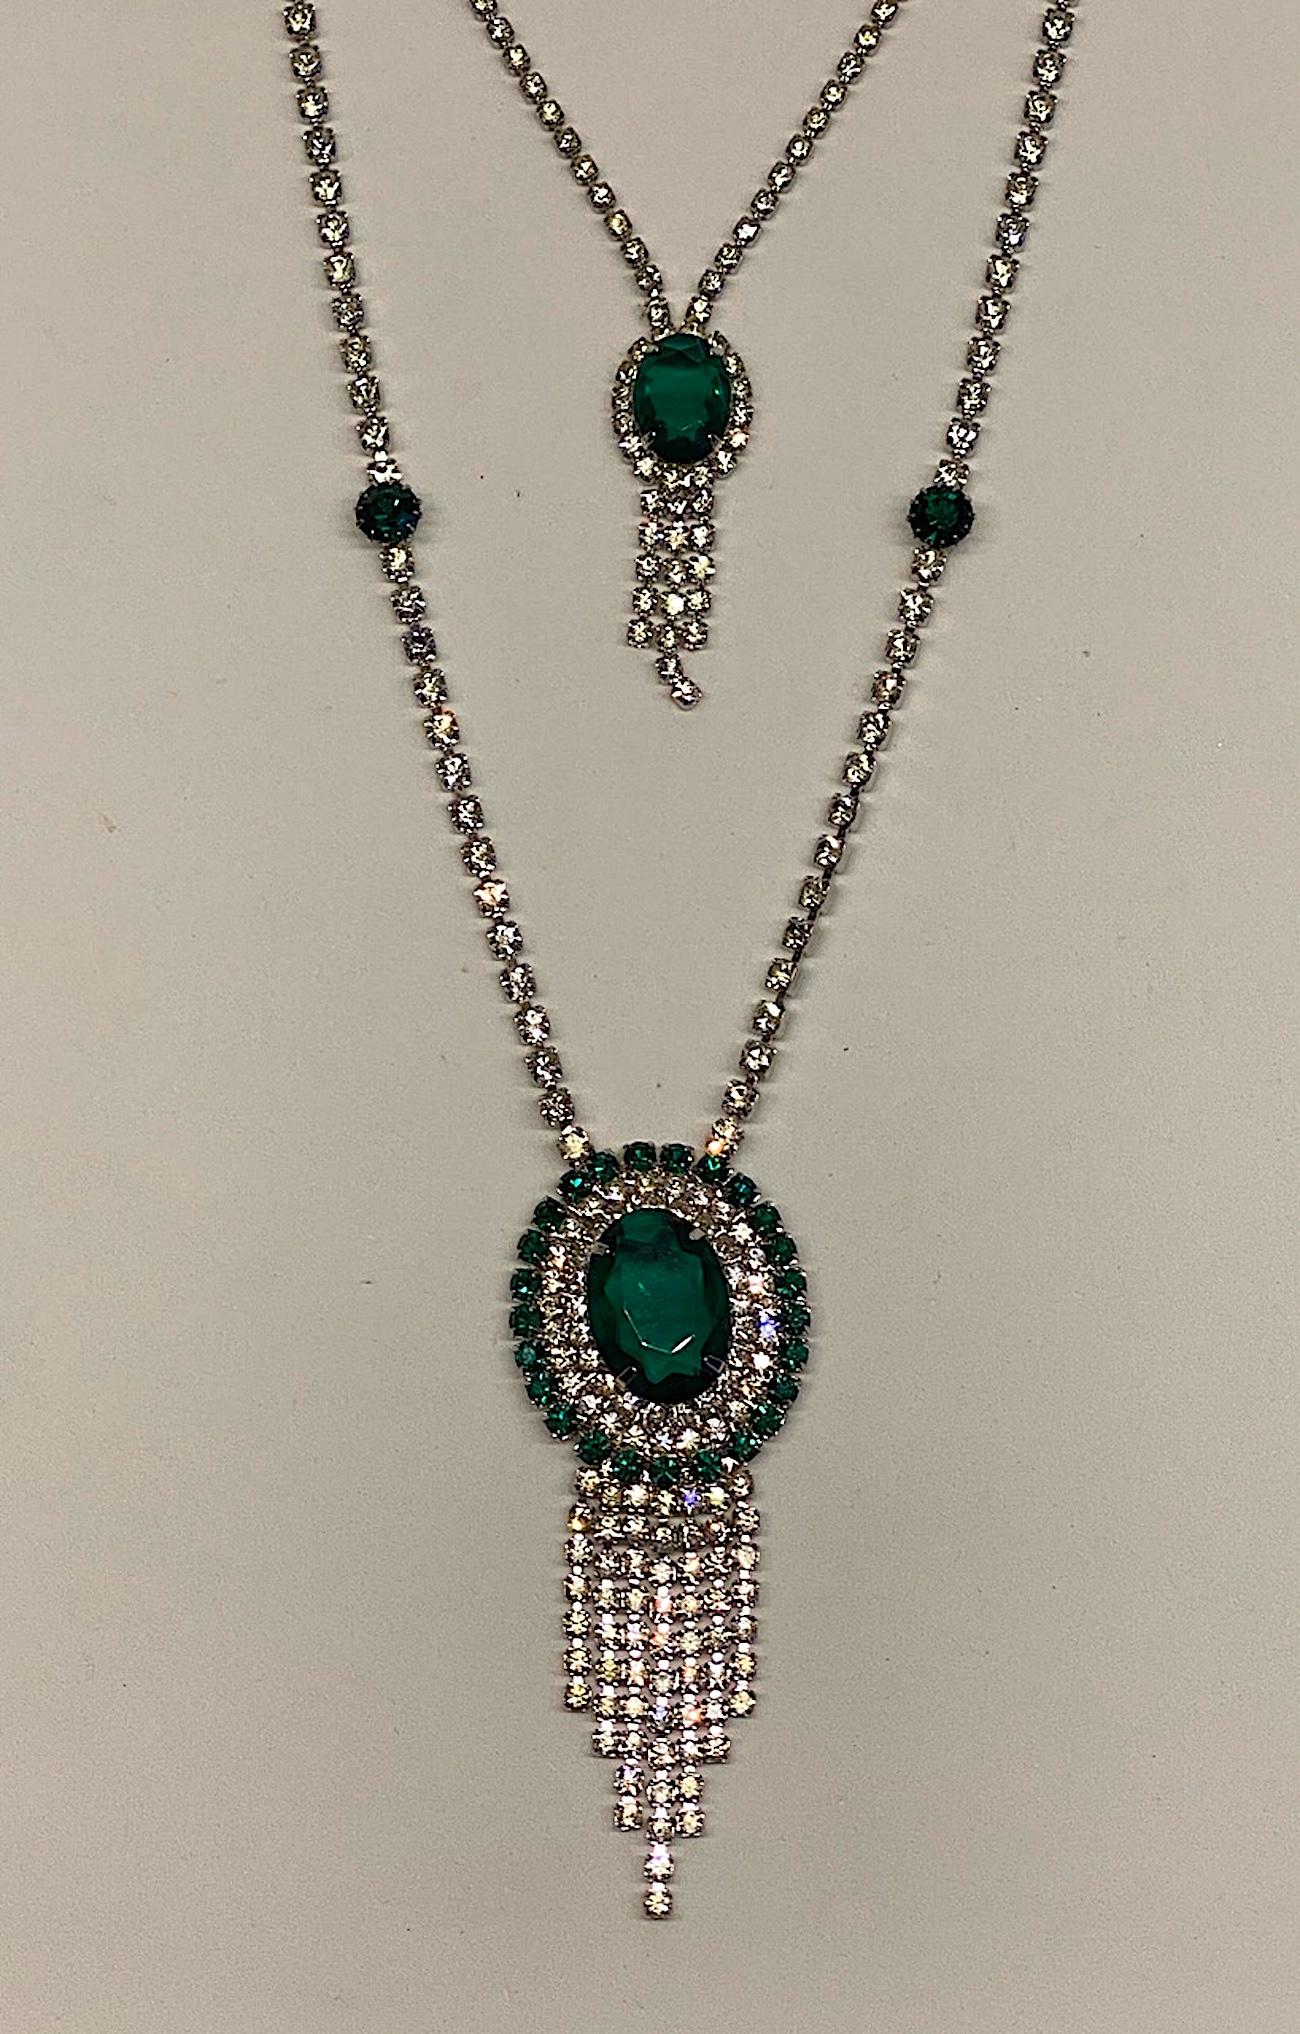 1950s / 1960s Emerald Green Crystal & Rhinestone Double Pendant Necklace 11